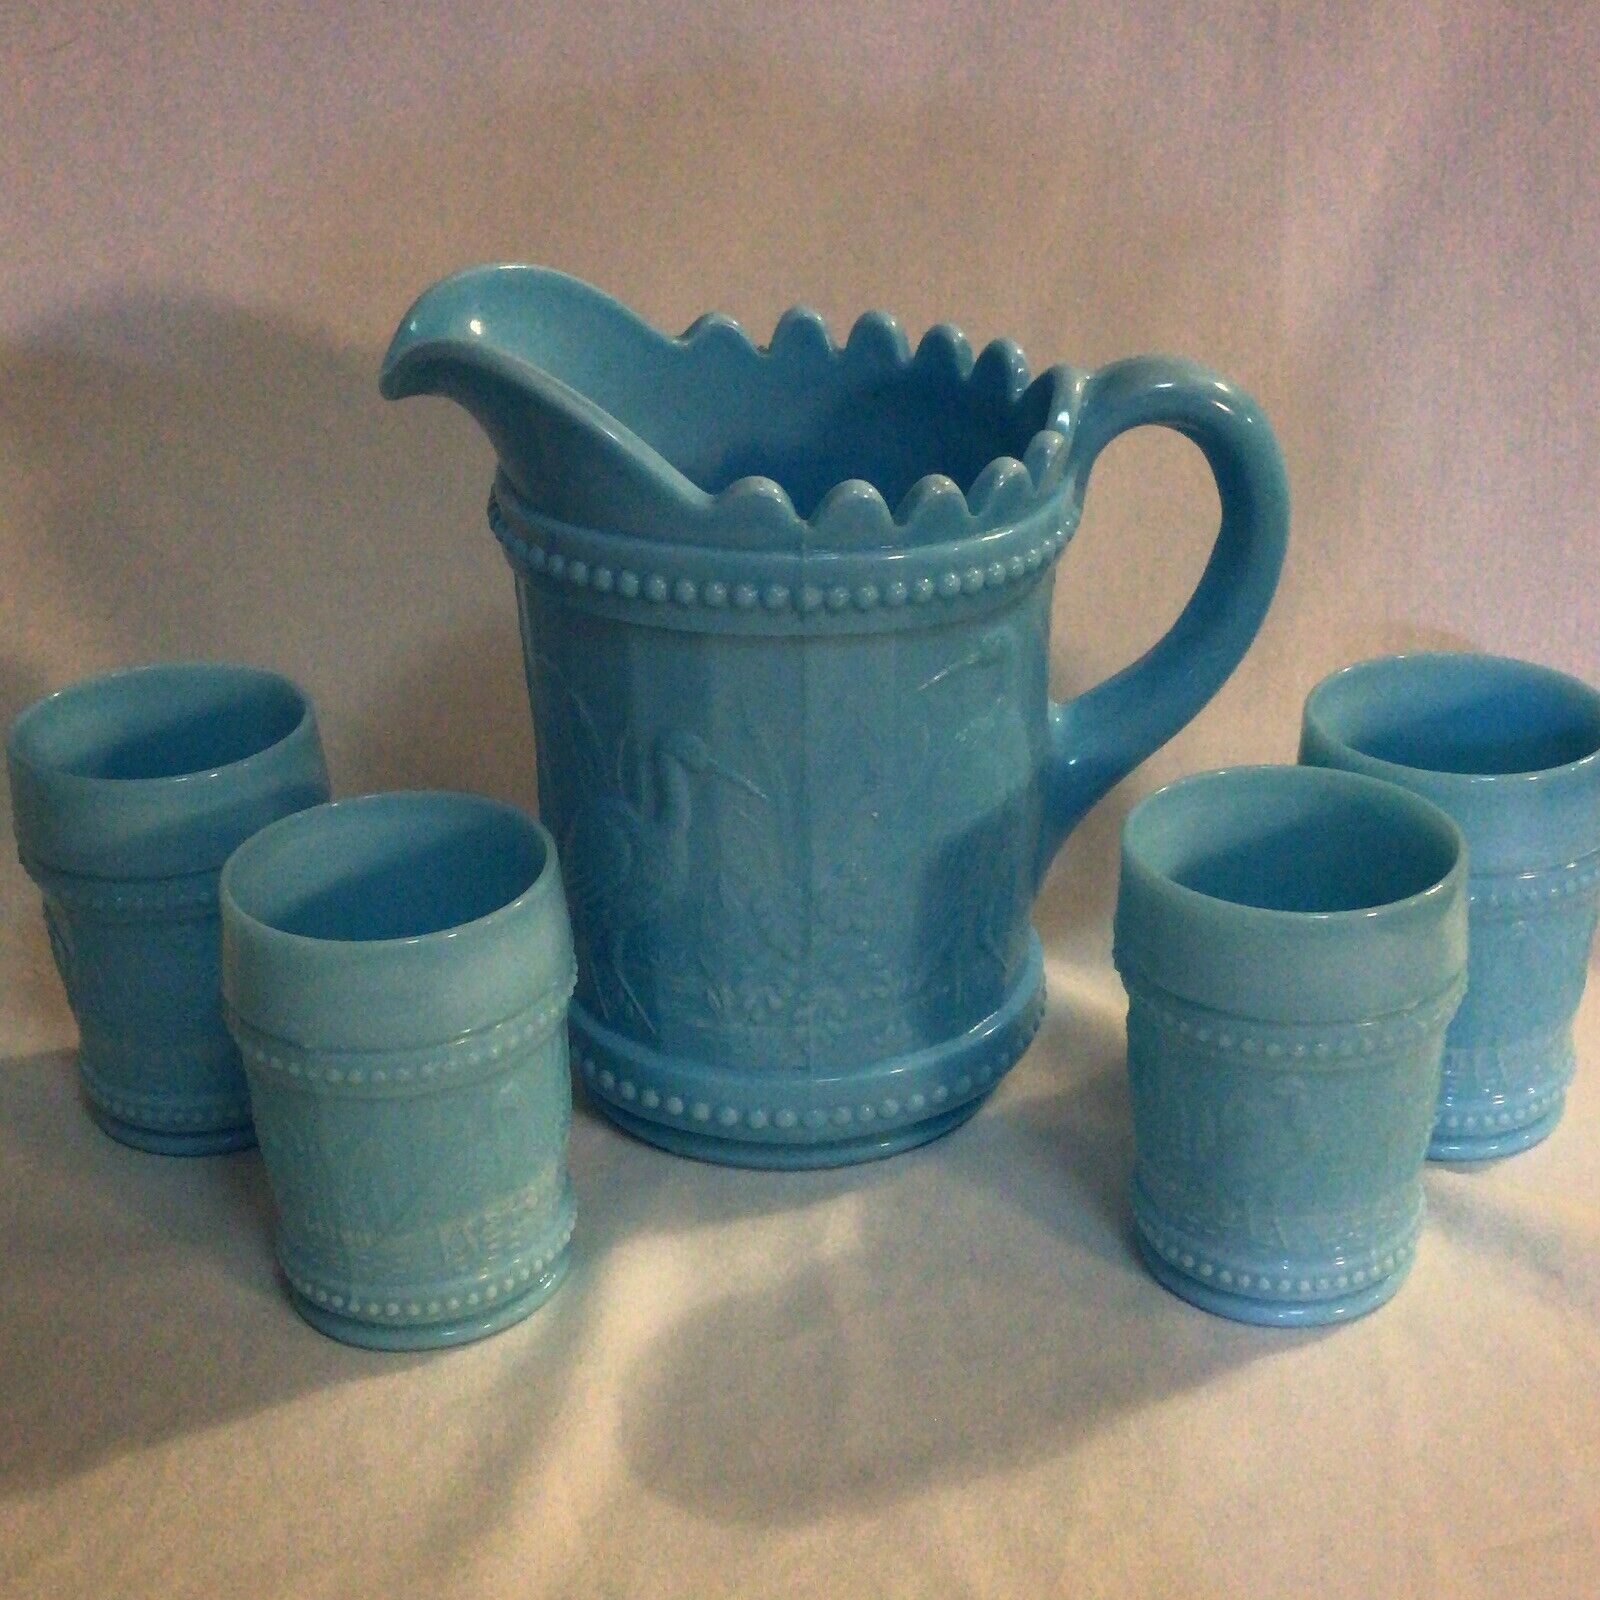 Antique LG Wright Water Set “Stork In Rushes” Blue Milkglass Pitcher 4 Tumblers